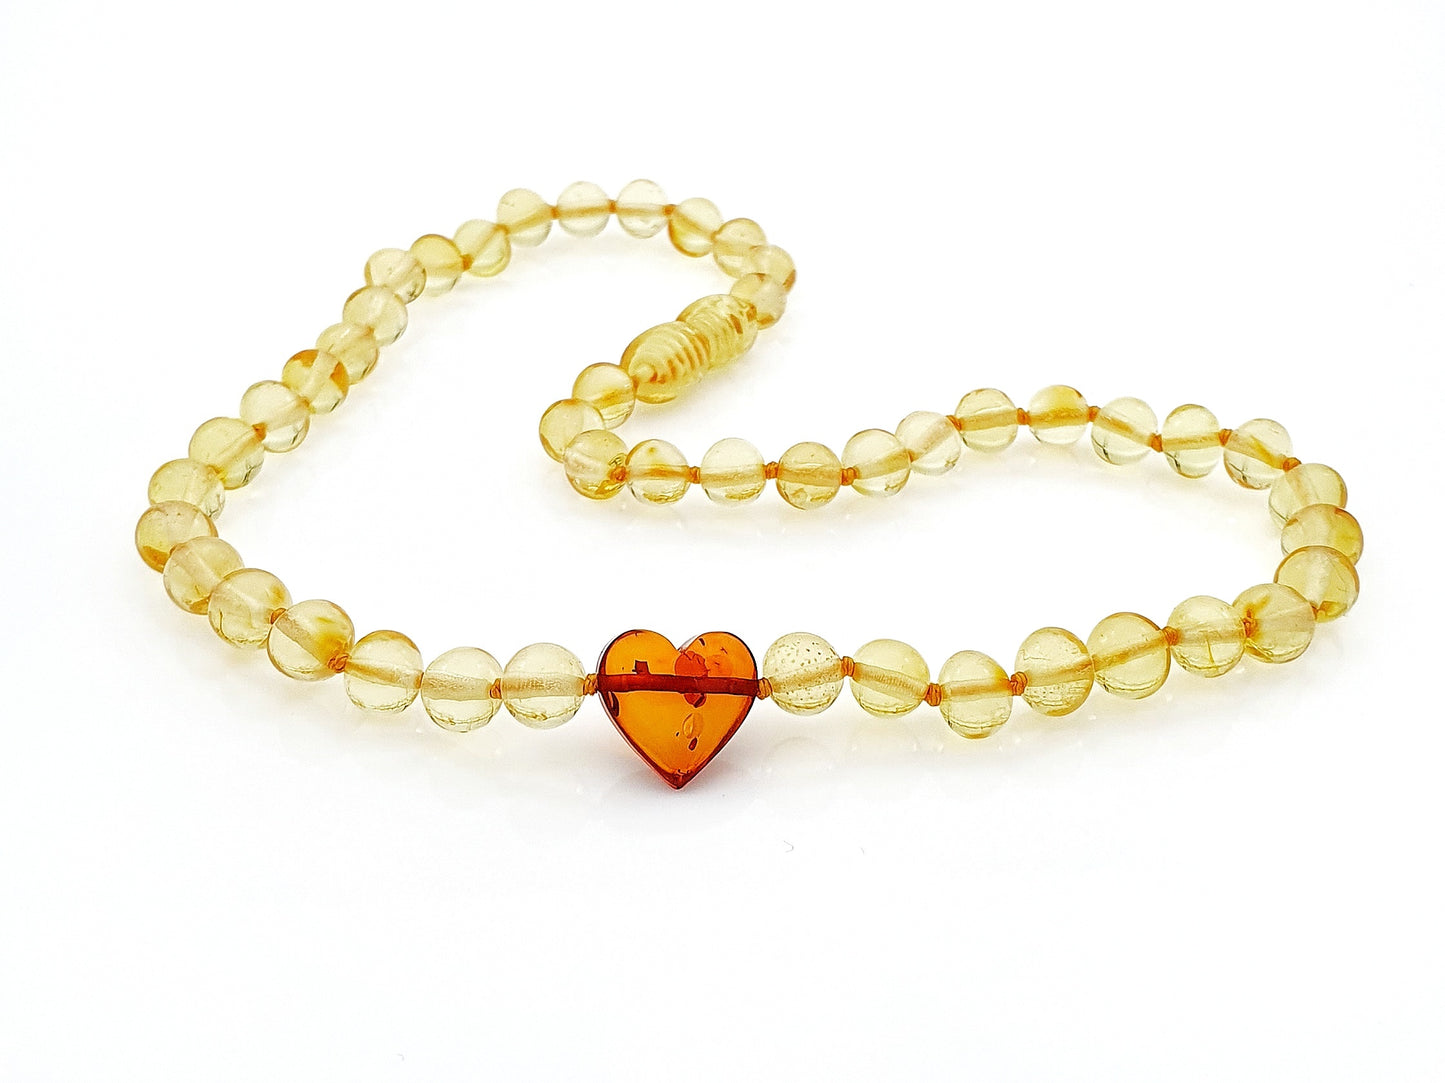 amber jewelry with amber heart pendant